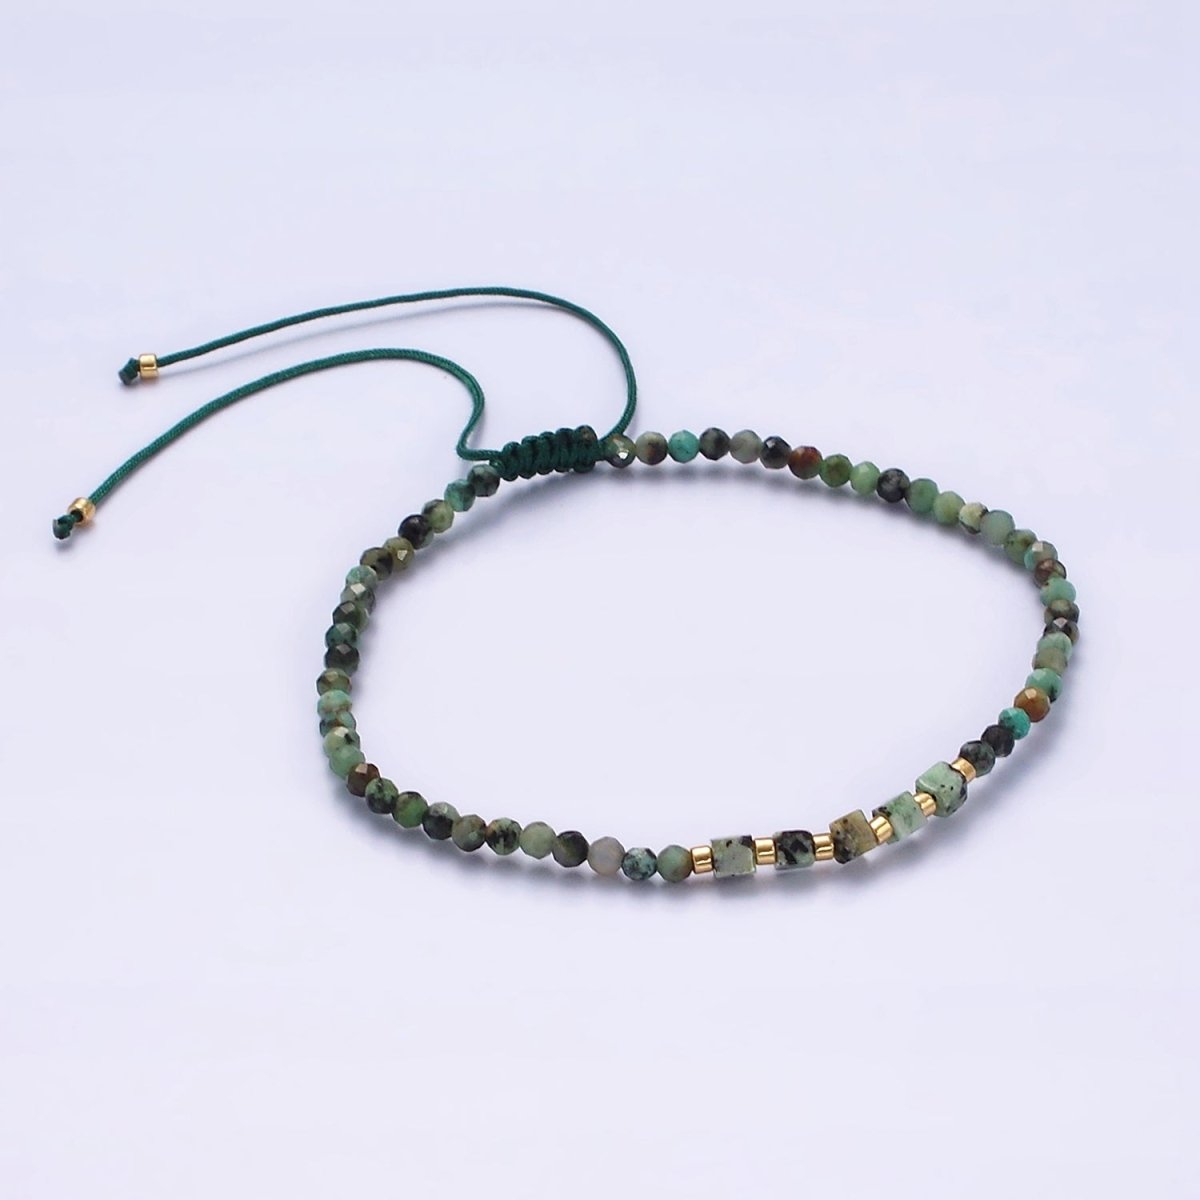 14K Gold Filled Moss Agate Multifaceted Green Rope Adjustable Friendship Bracelet | WA-2174 - WA-2176 Clearance Pricing - DLUXCA